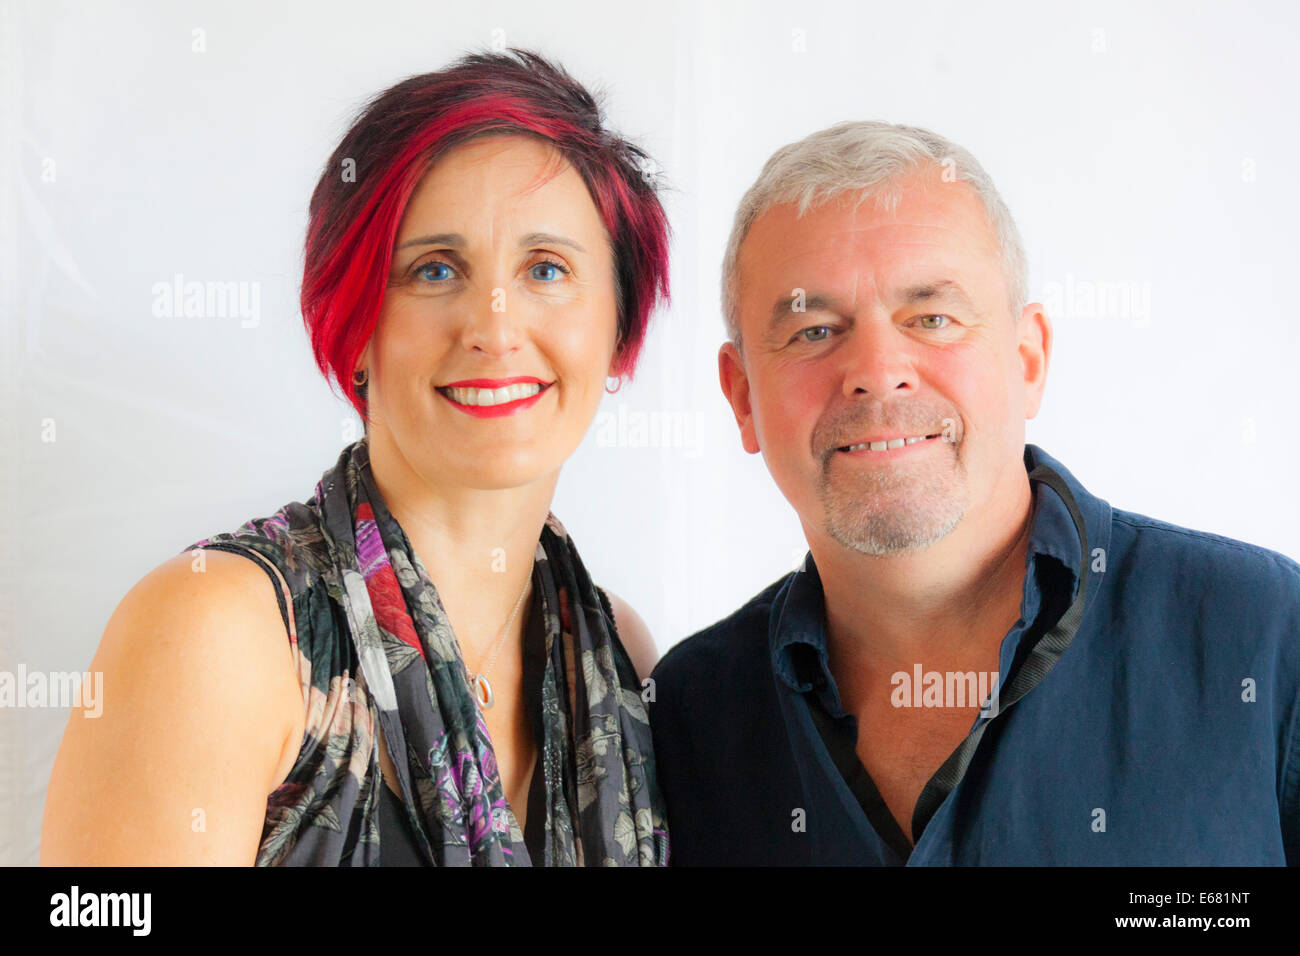 Remenham Henley-on-Thames Oxfordshire UK. 17 August 2014. Singers ALISON WHEELER and DAVE HEMINGWAY of the group The (Beautiful) South at the 2014 'Rewind South Festival' held 15-16-17 August 2014. Photograph Credit:  2014 John Henshall / Alamy Live News. PER0407 Stock Photo